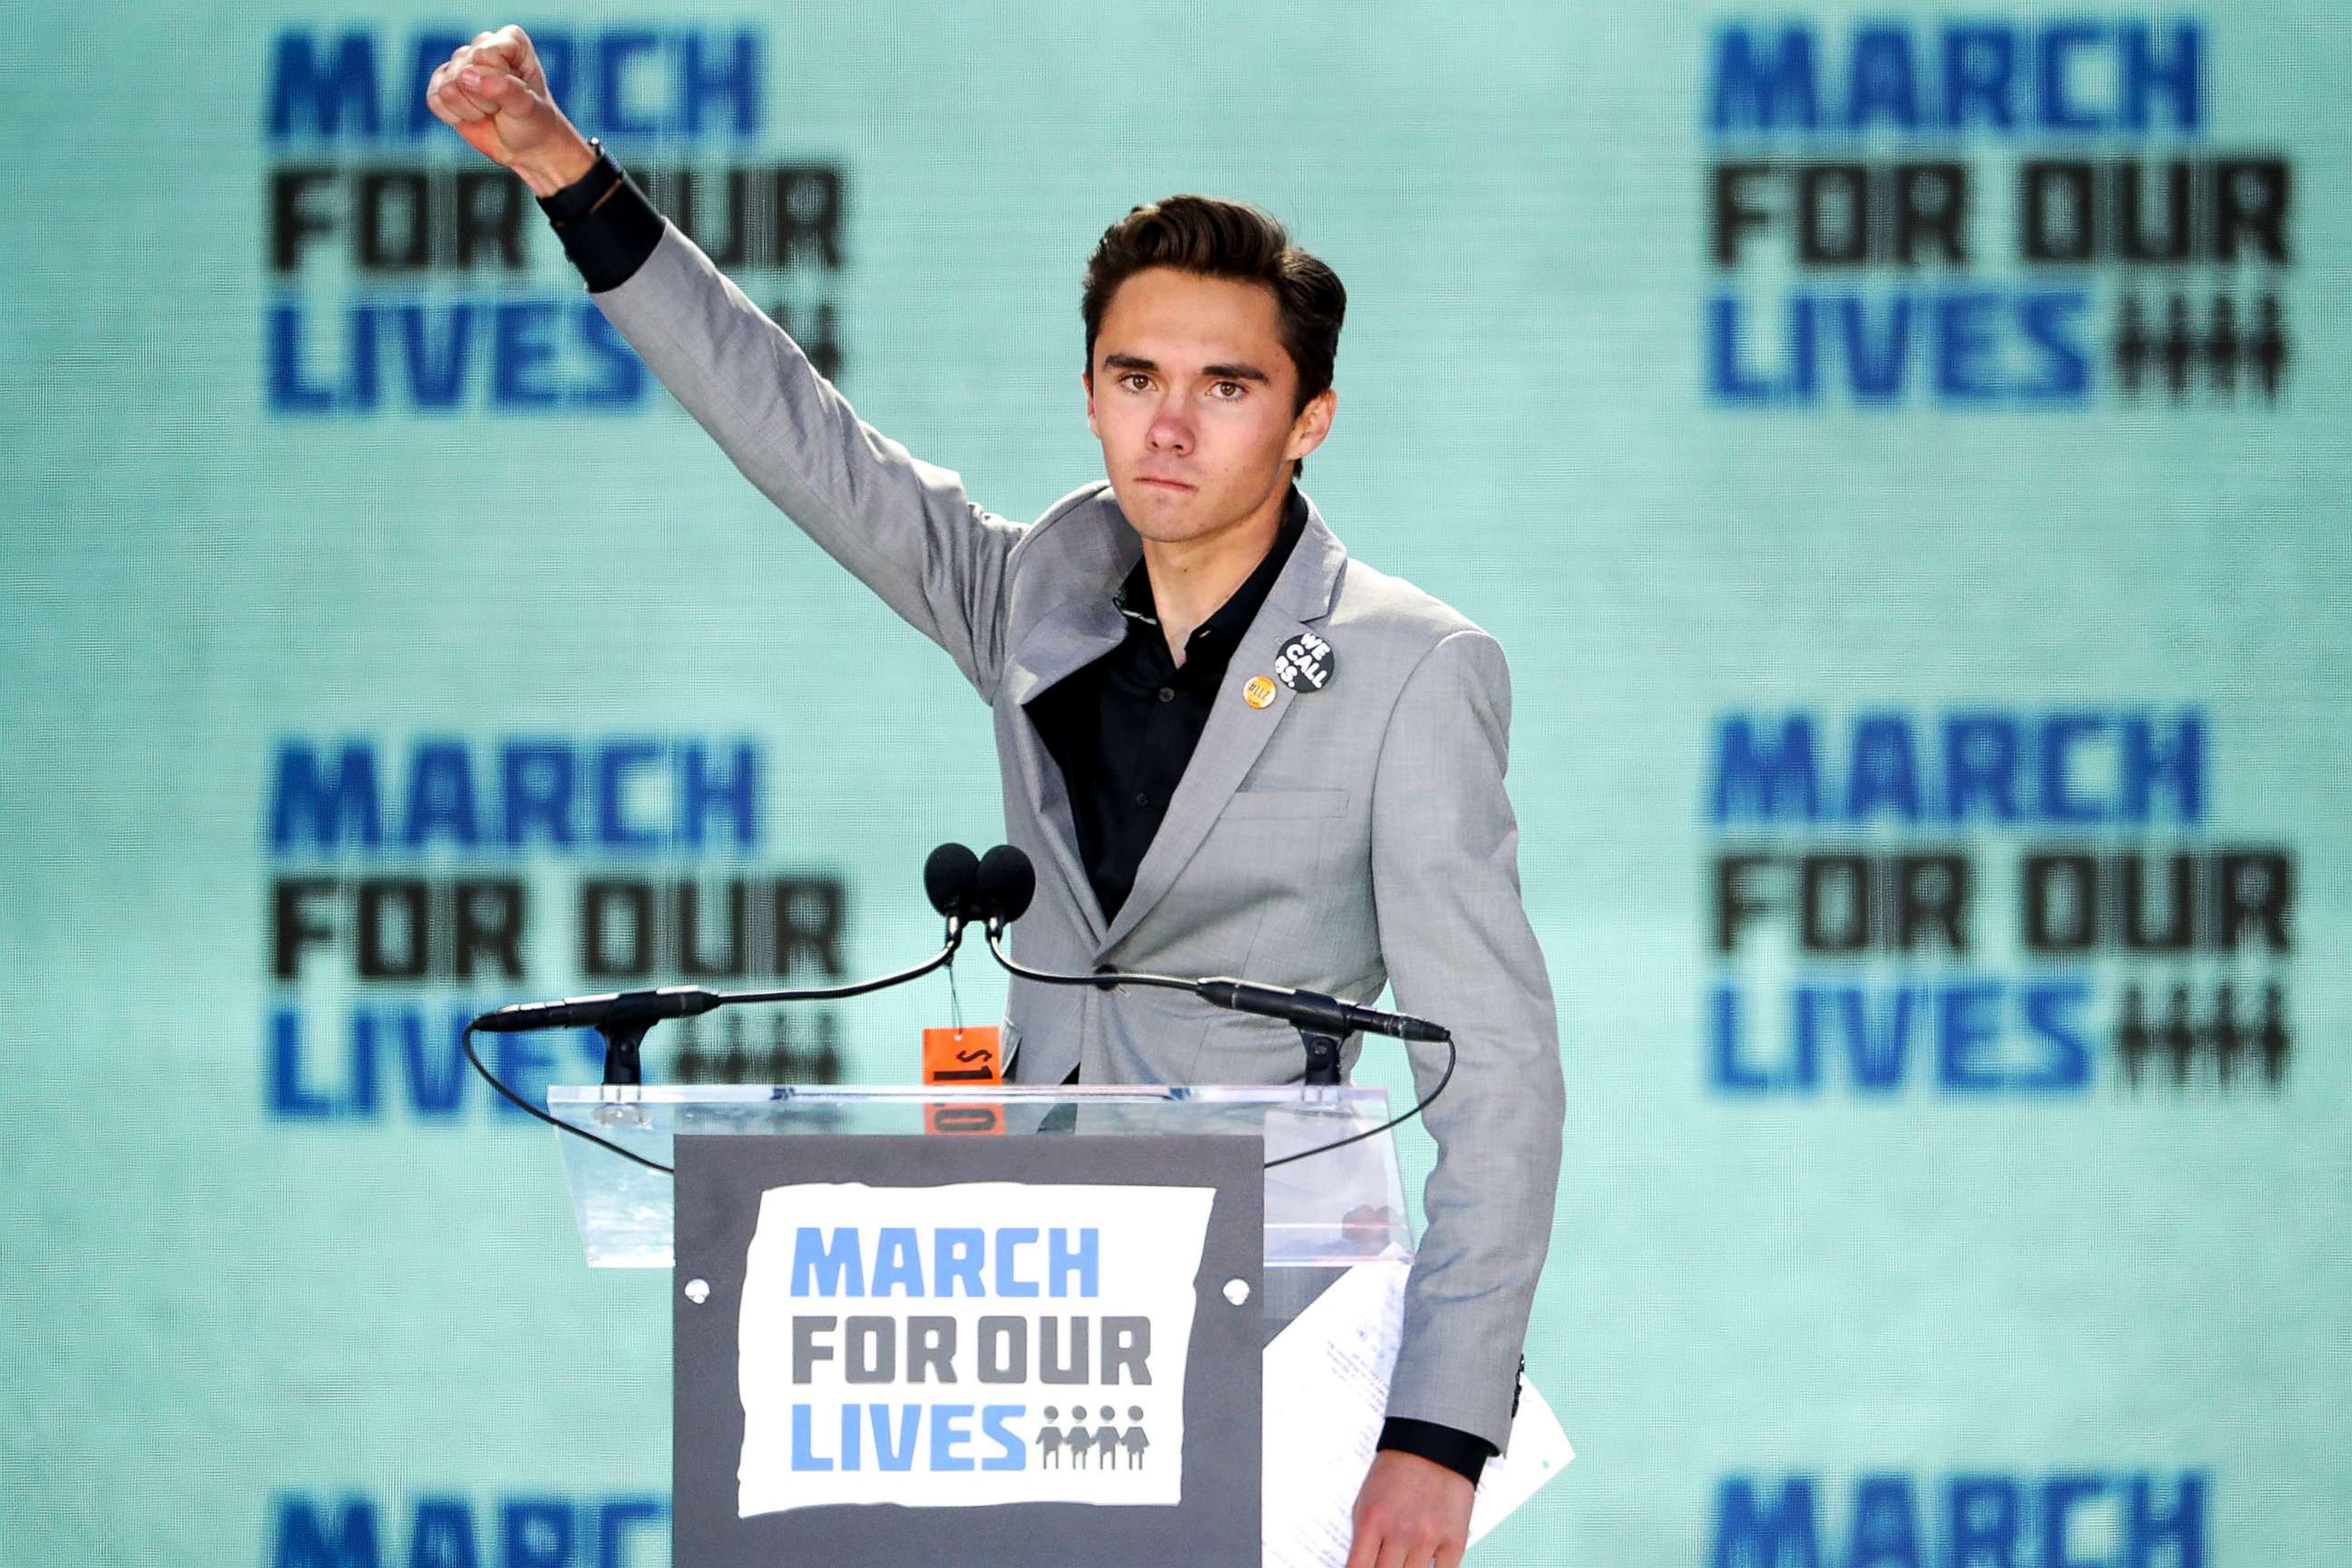 PHOTO: Marjory Stoneman Douglas High School Student David Hogg addresses the March for Our Lives rally, March 24, 2018, in Washington.